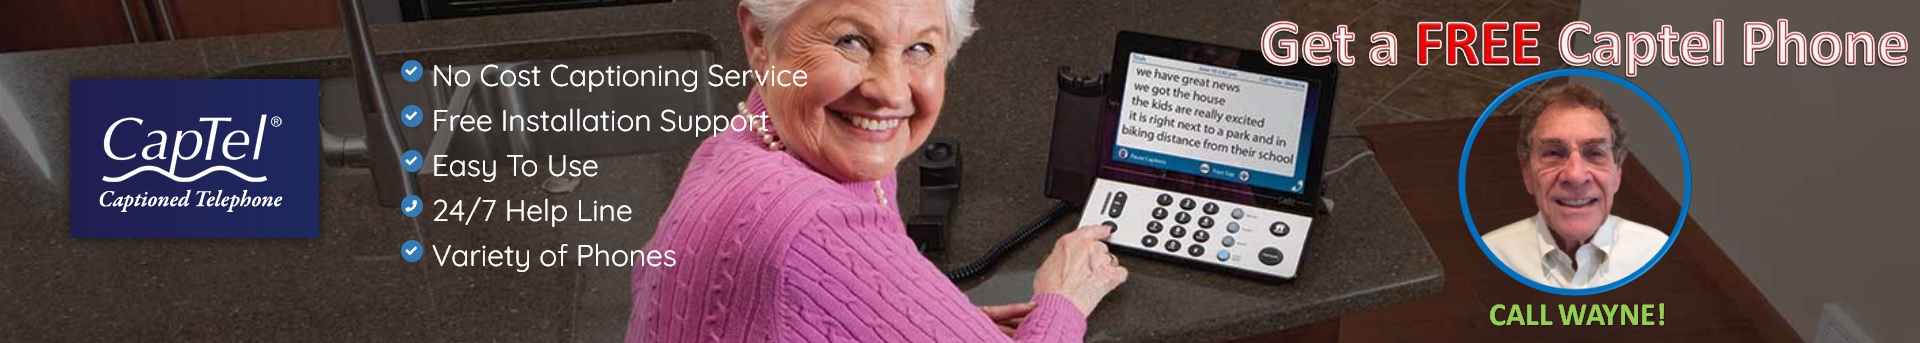 Get a FREE Captel Phone - Top Brand Hearing Aids